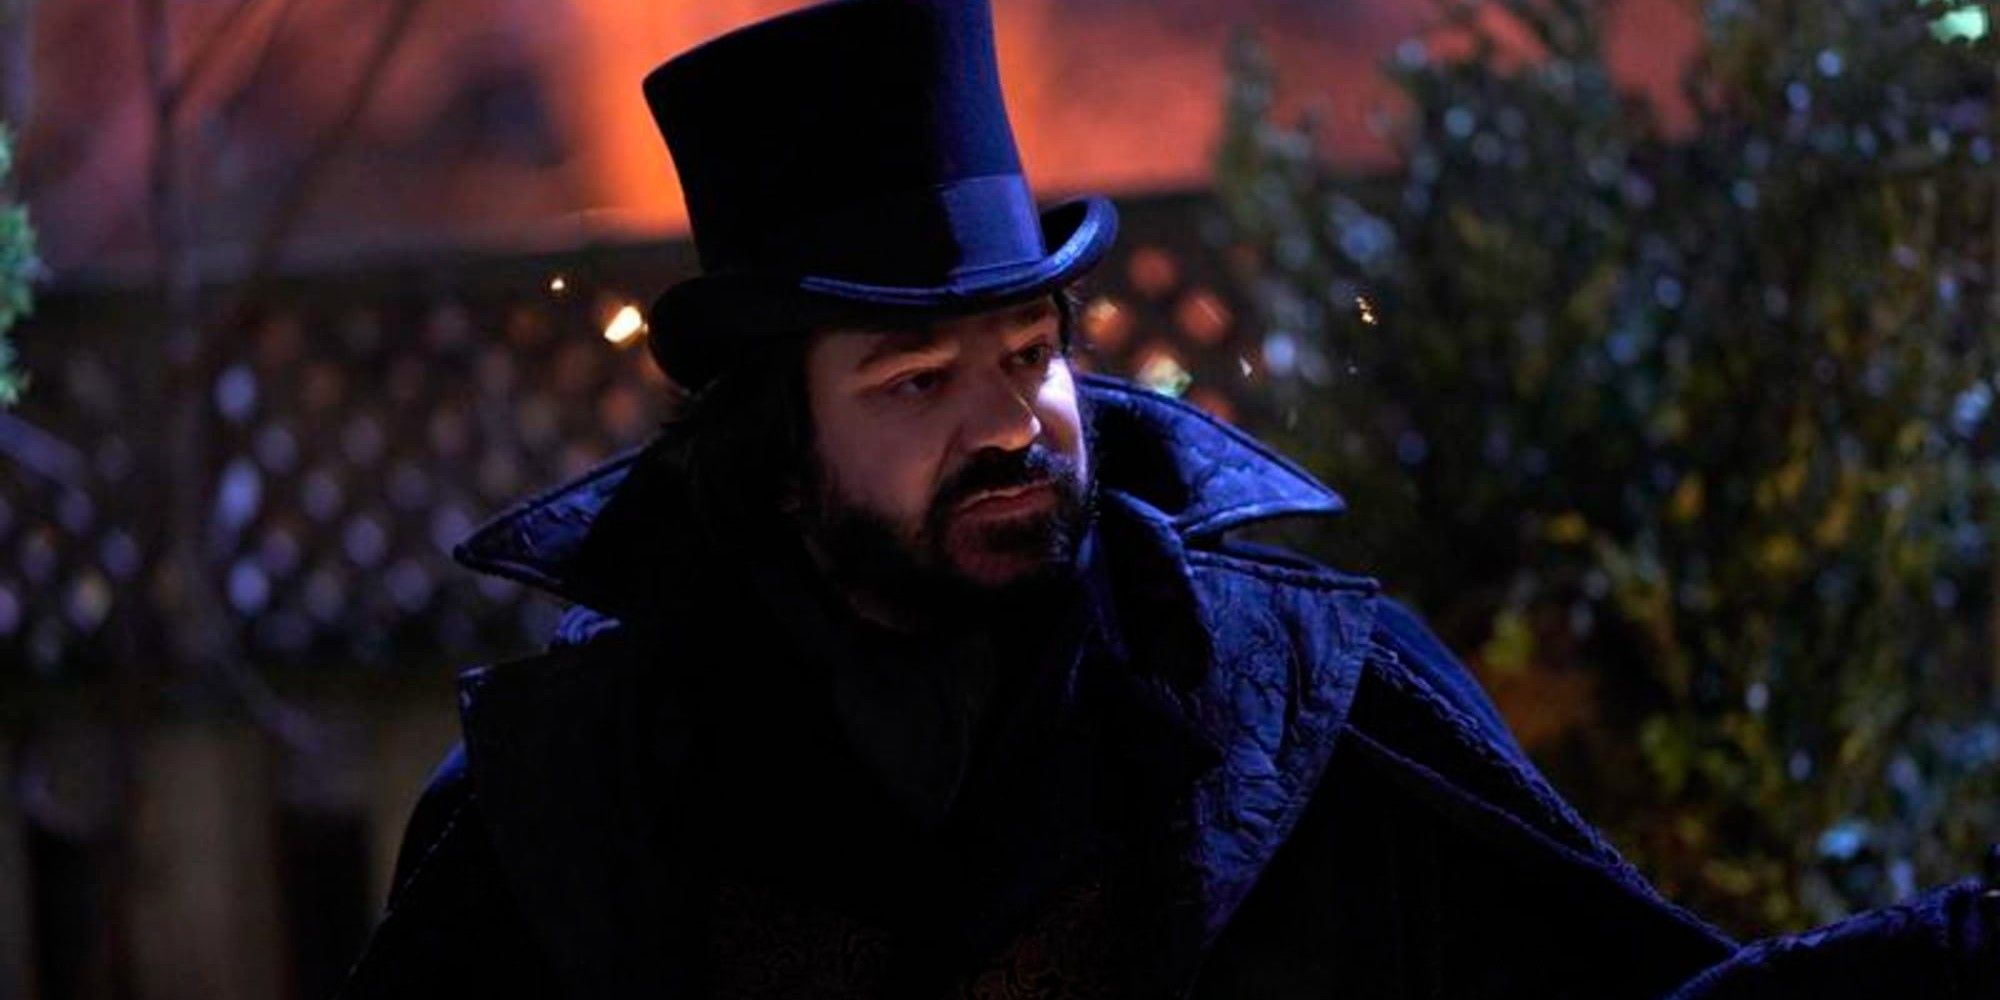 Laszlo wearing a top hat at night in What We Do in the Shadows